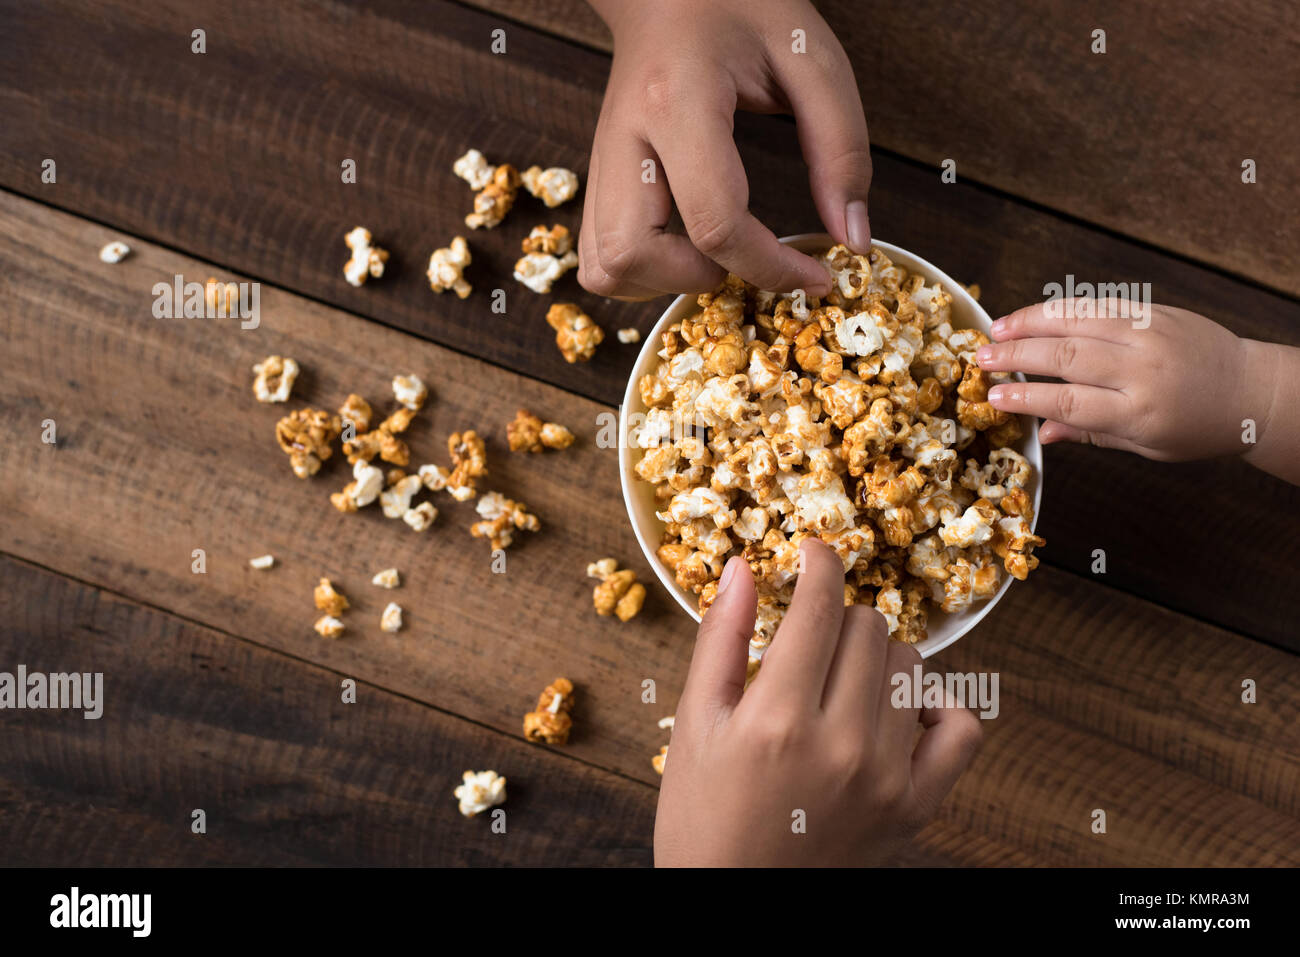 3 kids sharing eating popcorn in a bowl on a wooden table background. sharing concept. Stock Photo